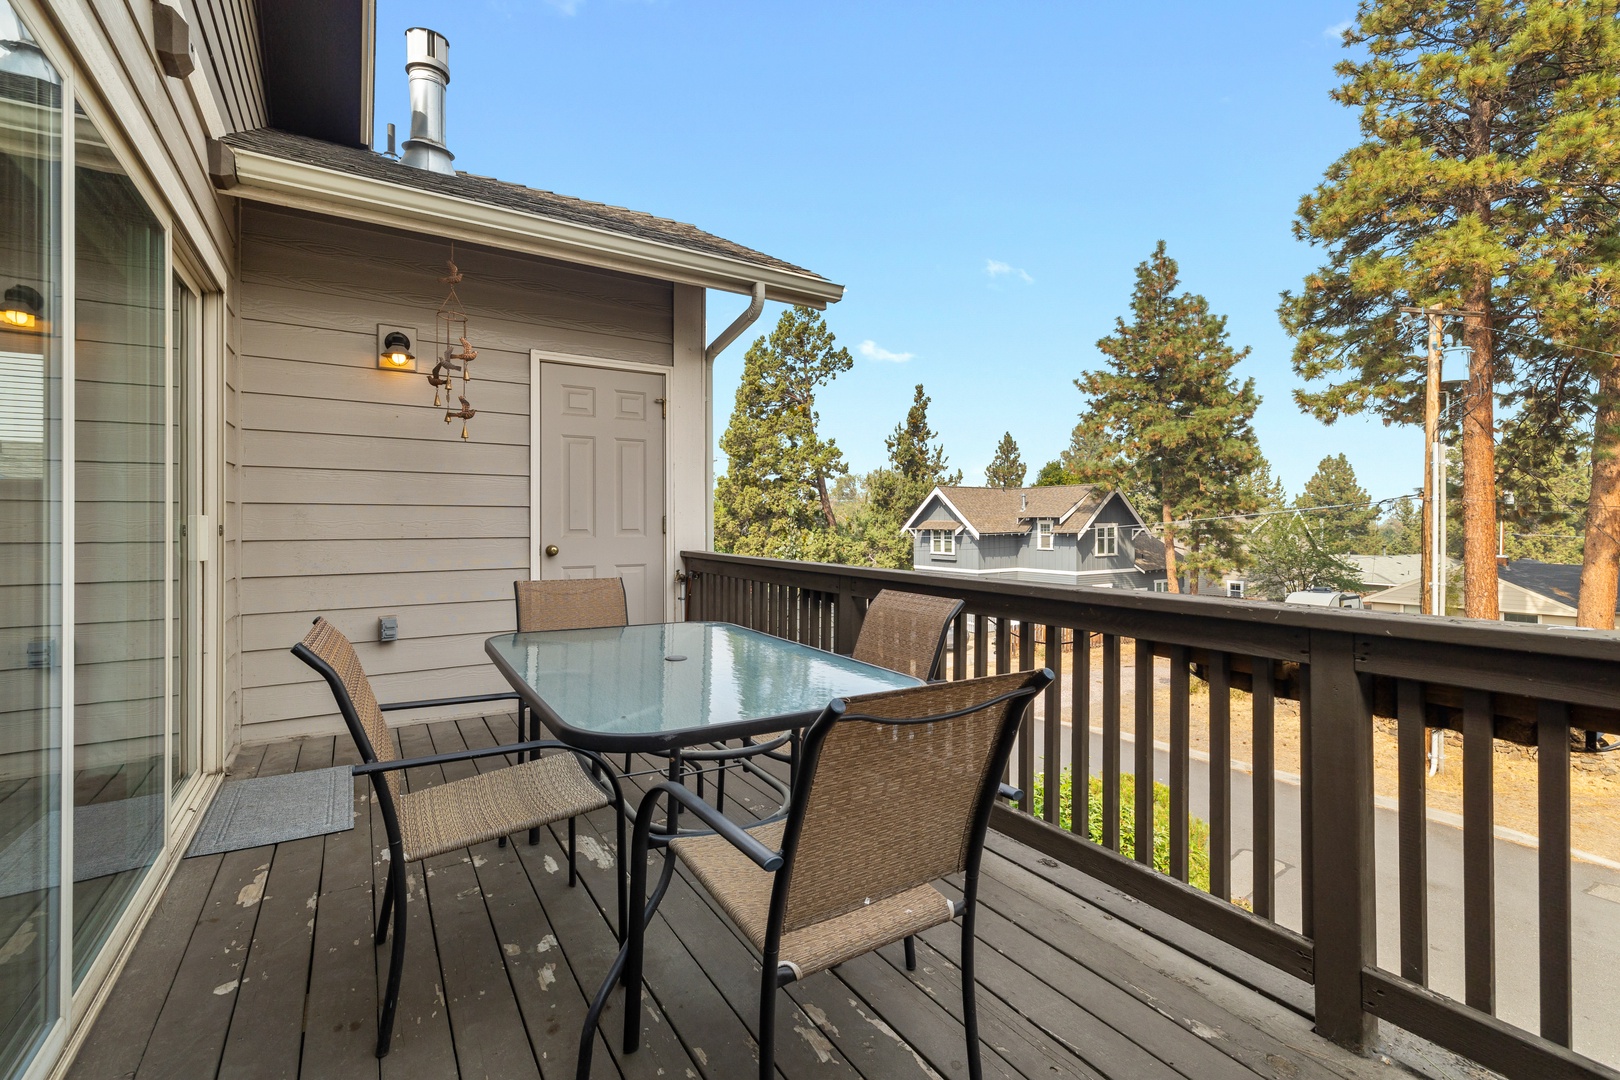 Dine al fresco or lounge the day away on the back deck